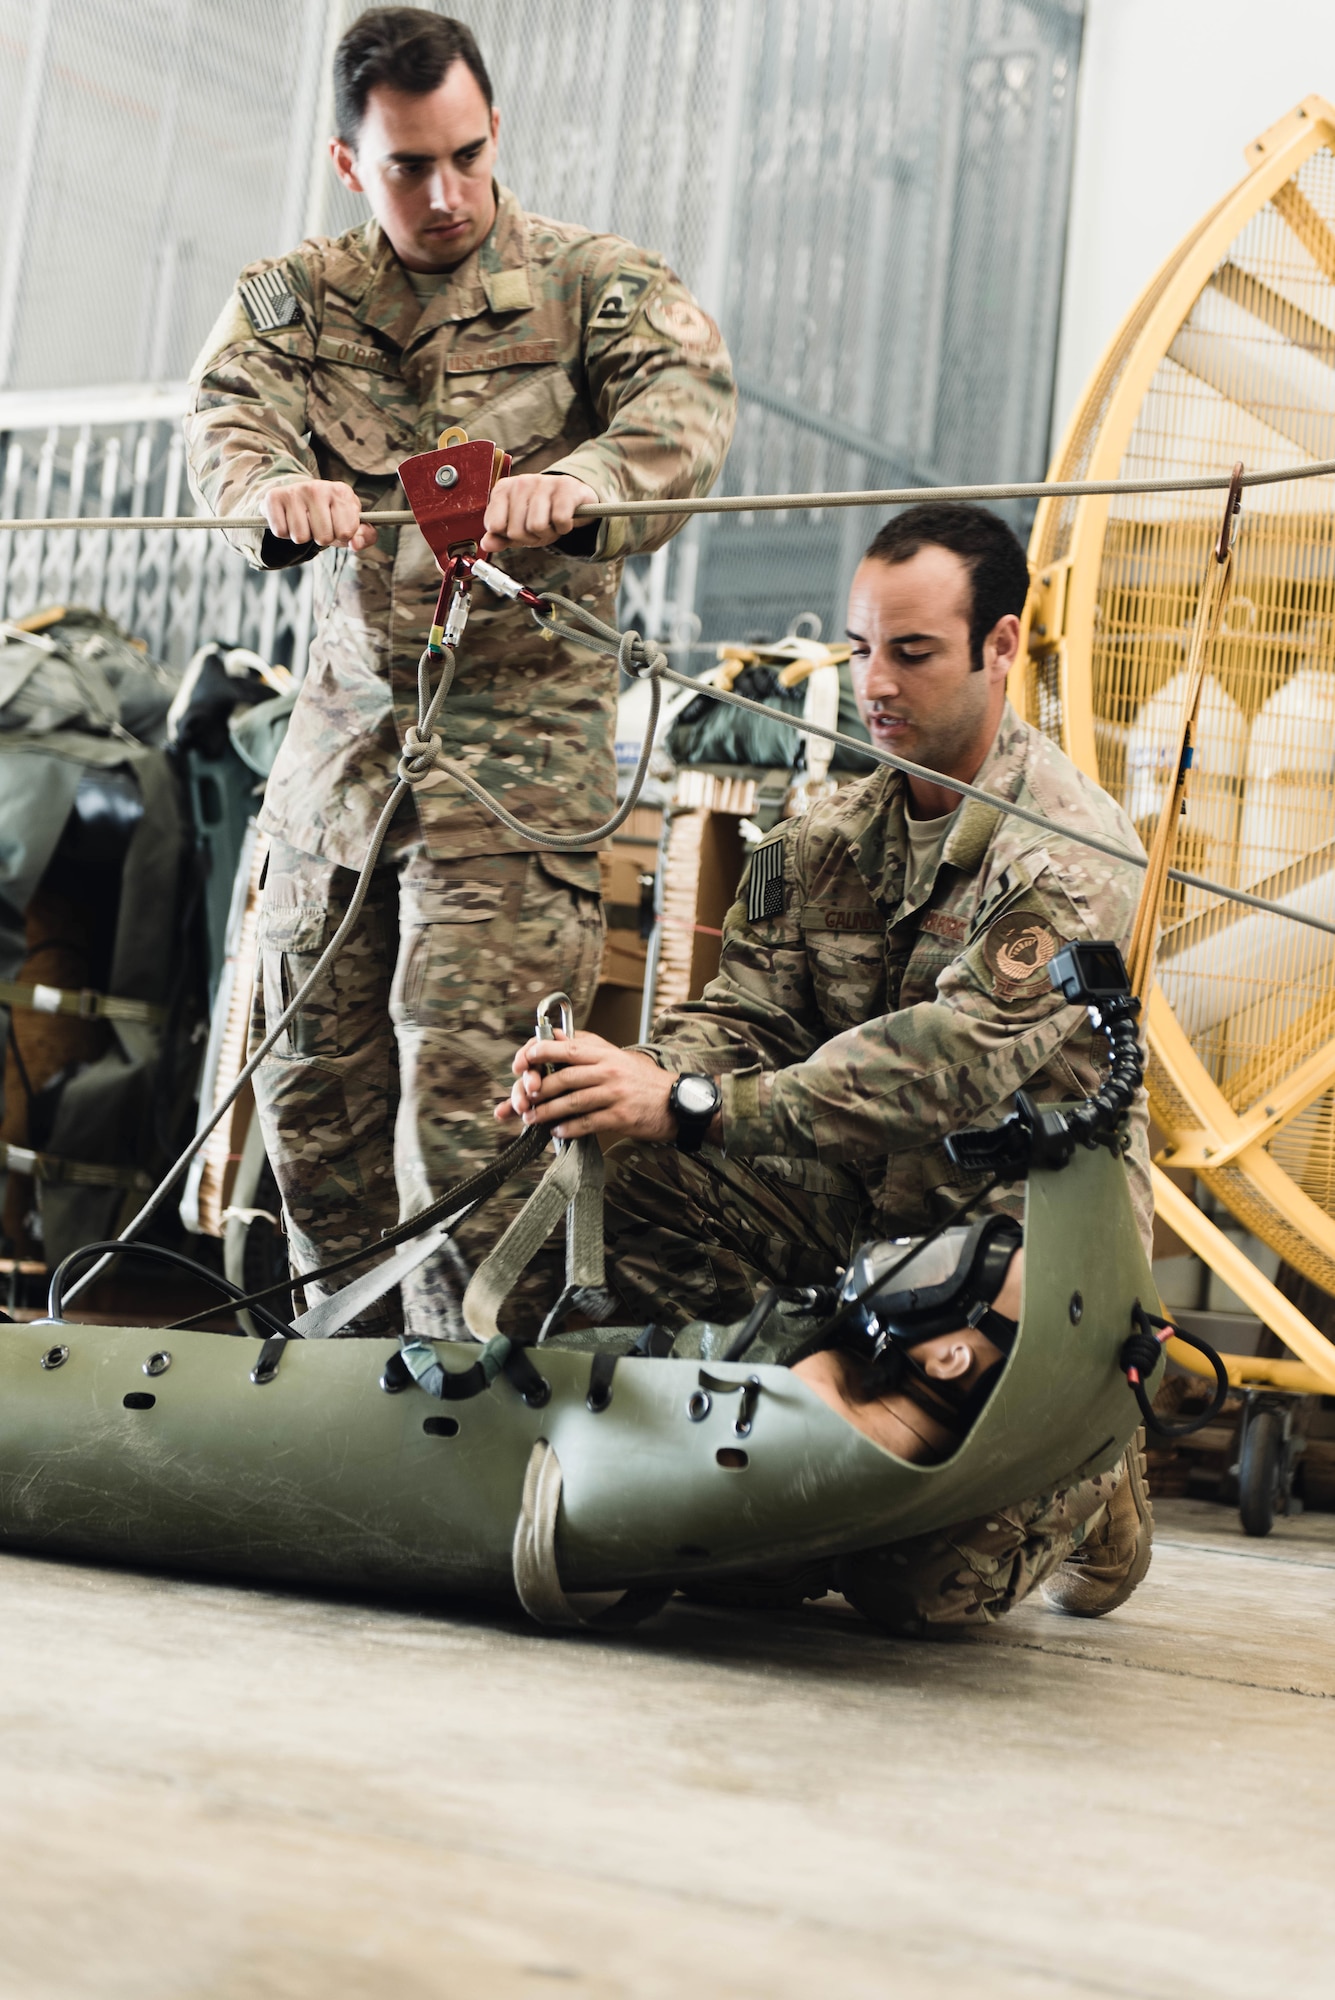 Tech. Sgt. Kenneth O’Brien and Staff Sgt. Michael Galindo, 320th Special Tactics Squadron pararescuemen, lower and detach a training dummy from a rope system, Aug. 20, 2018, at Kadena Air Base, Japan. Dozens of U.S. military personnel, including pararescue Airmen based in Okinawa, were part of a multinational effort that saved 12 young soccer players and their coach from a flooded cave in Thailand. (U.S. Air Force photo by Senior Airman Omari Bernard)